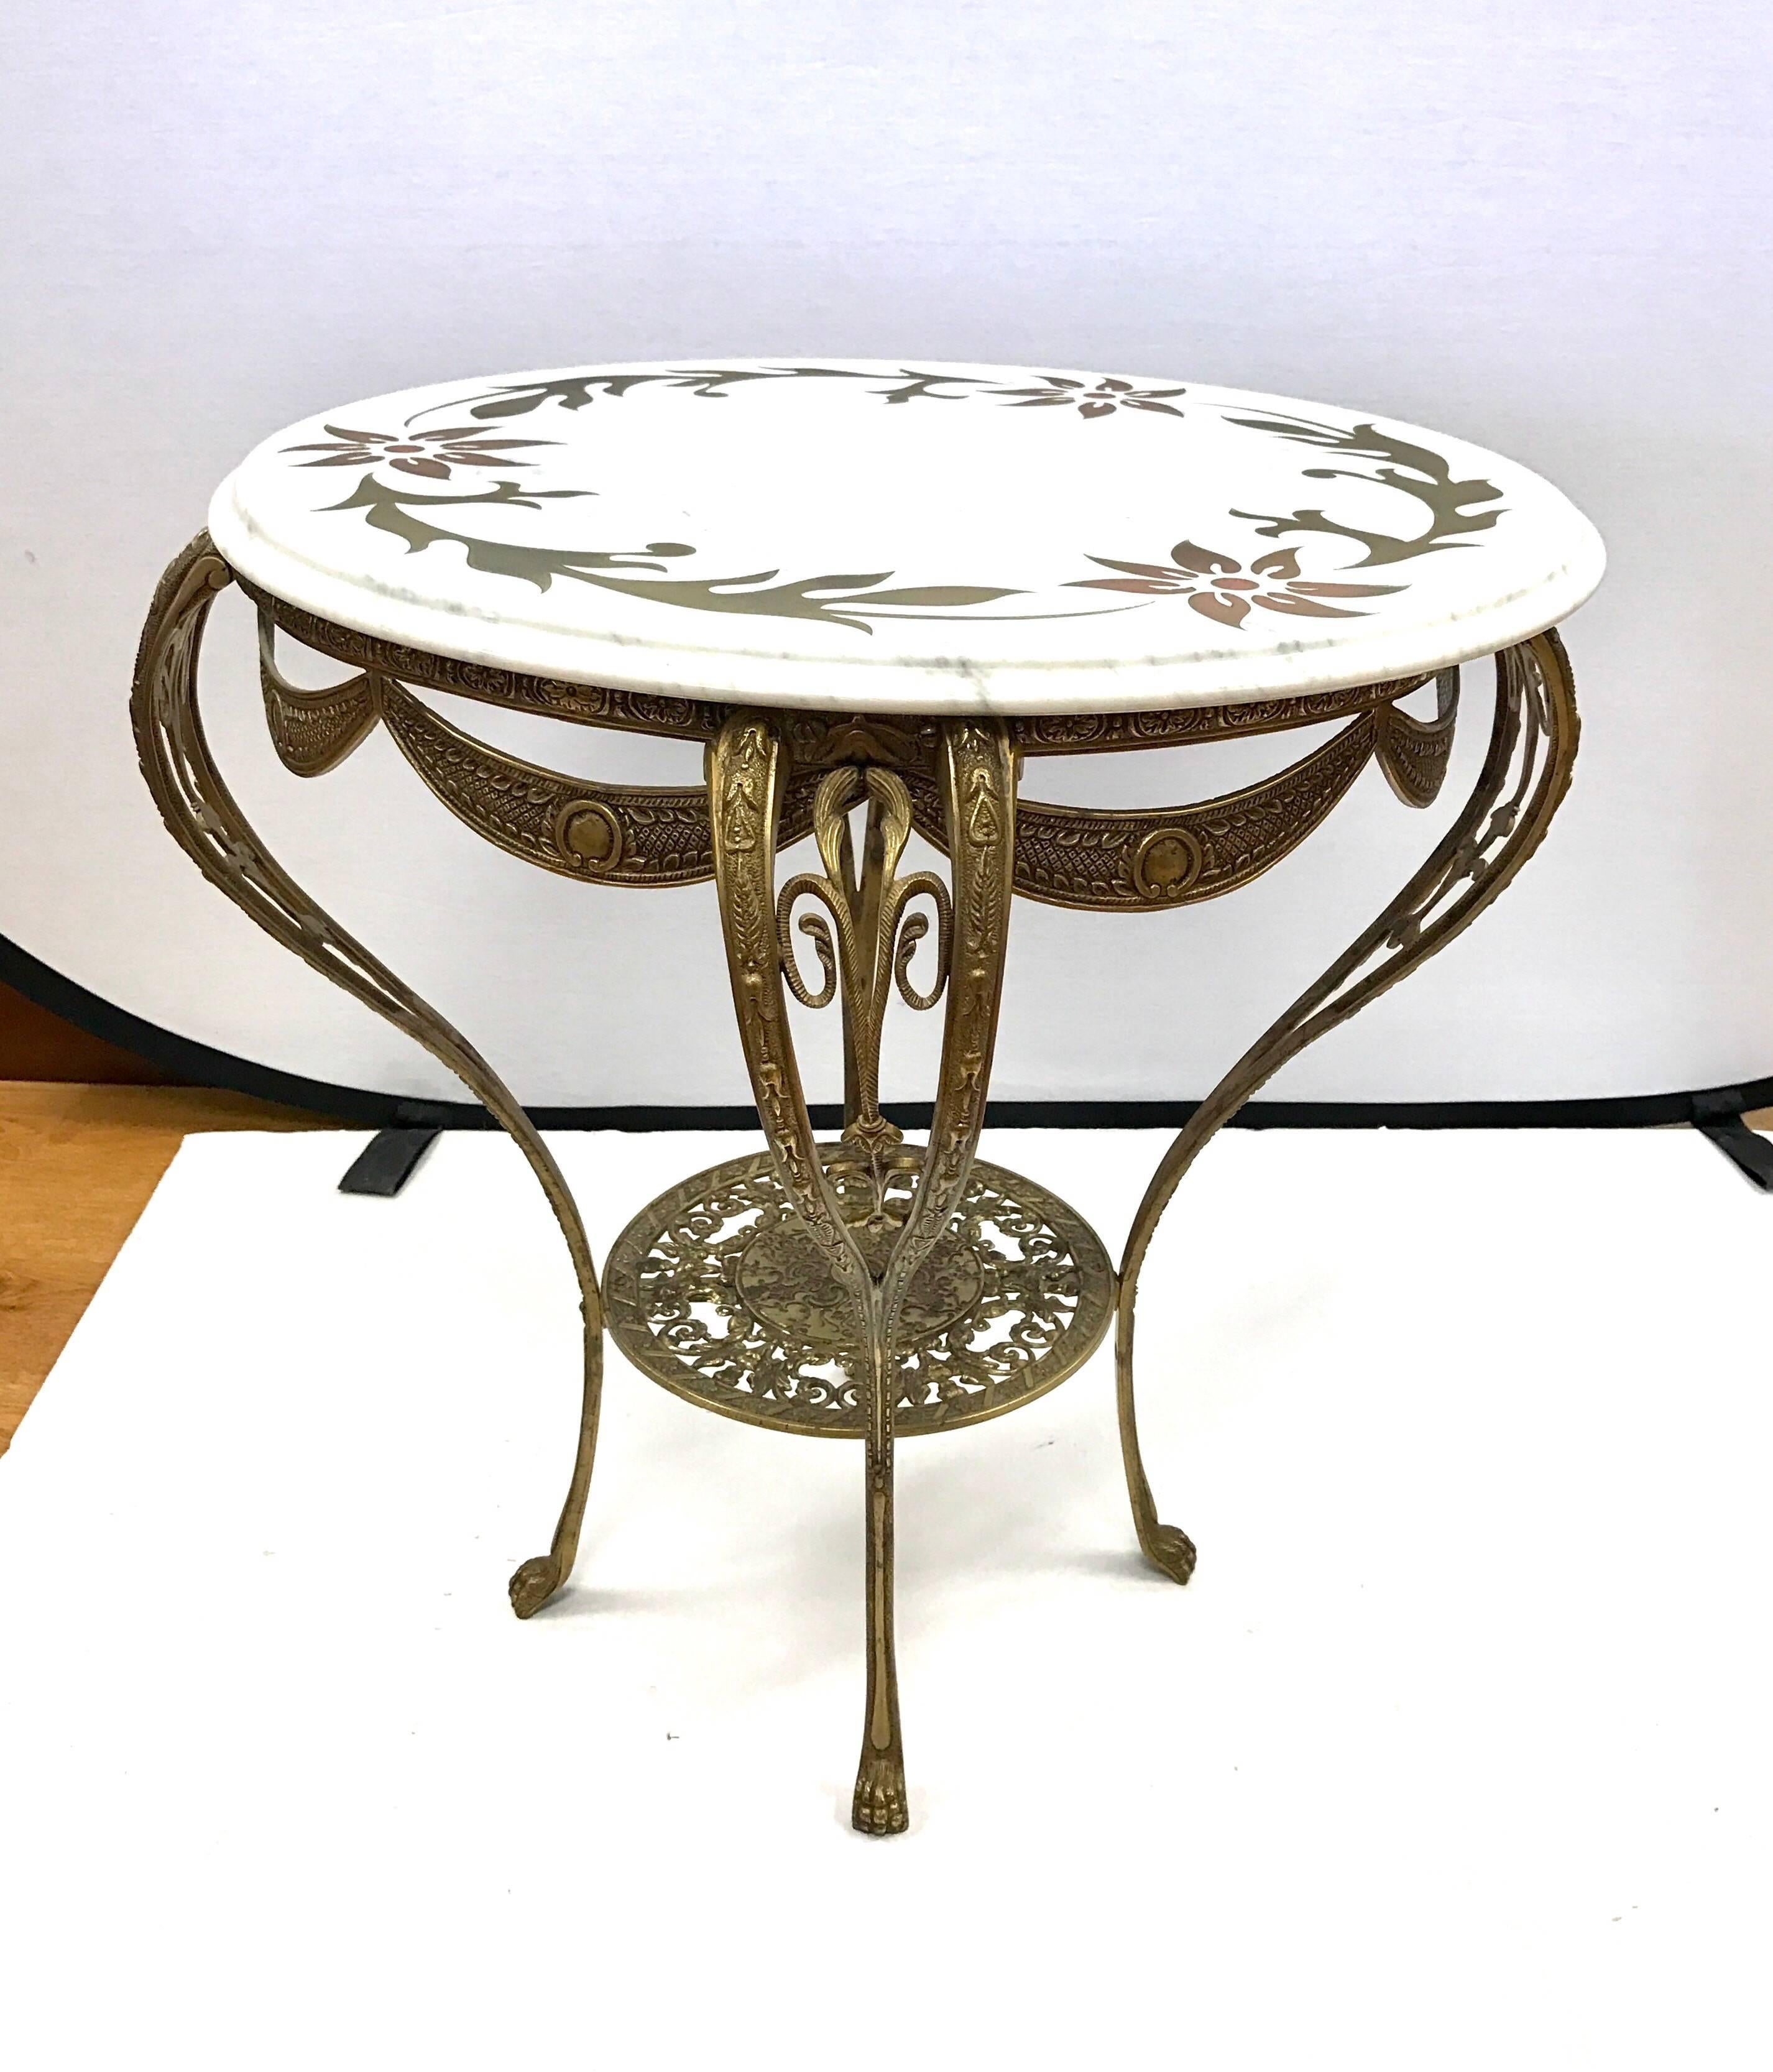 Mid-20th Century Italian Brass and Marble Round Table, Made in Italy